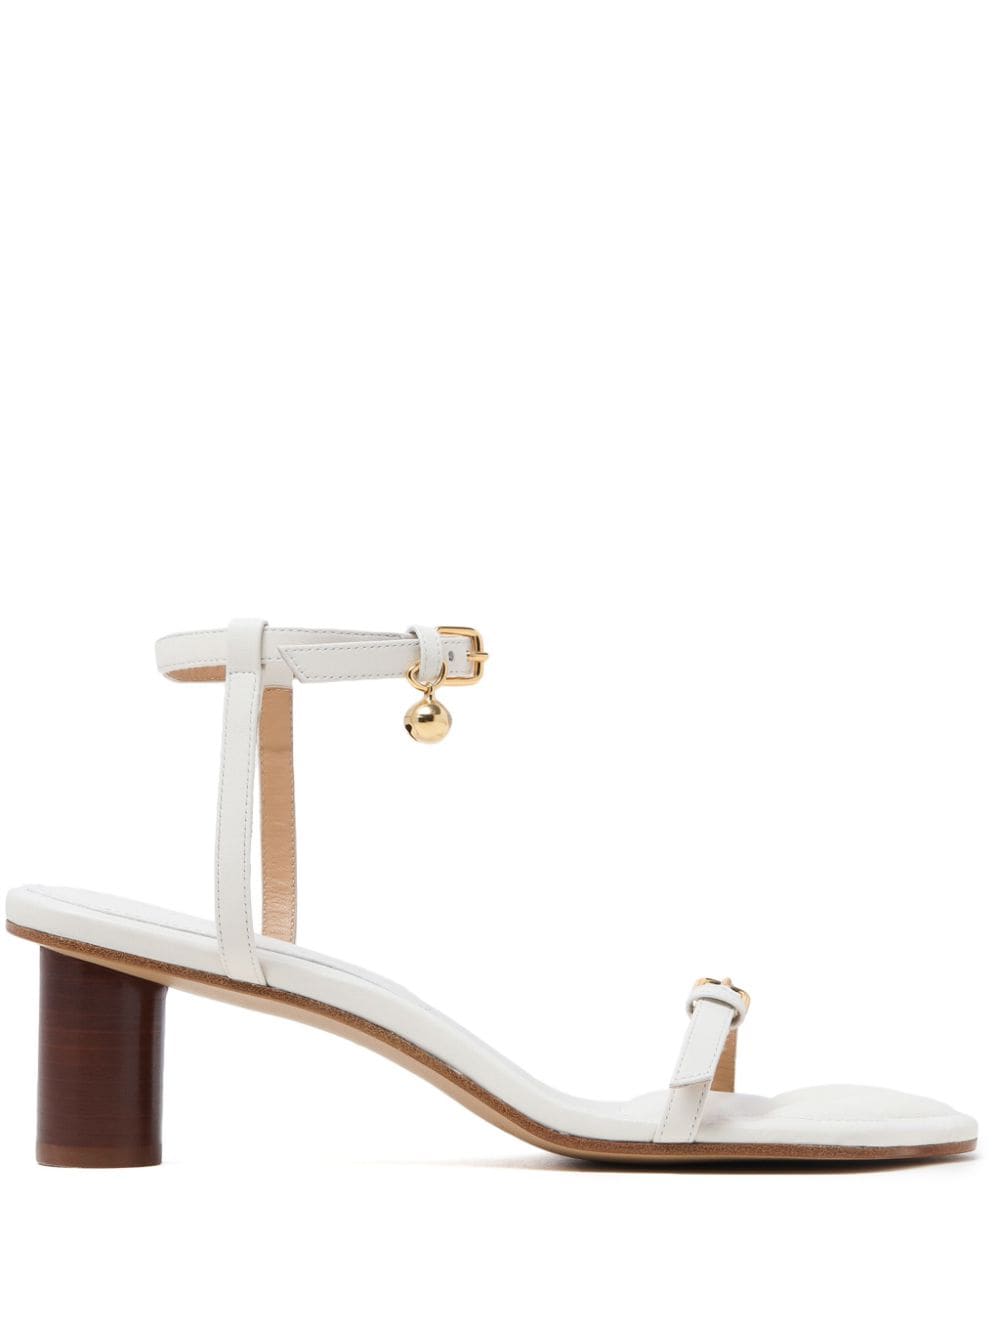 JW Anderson Paw leather sandals - White